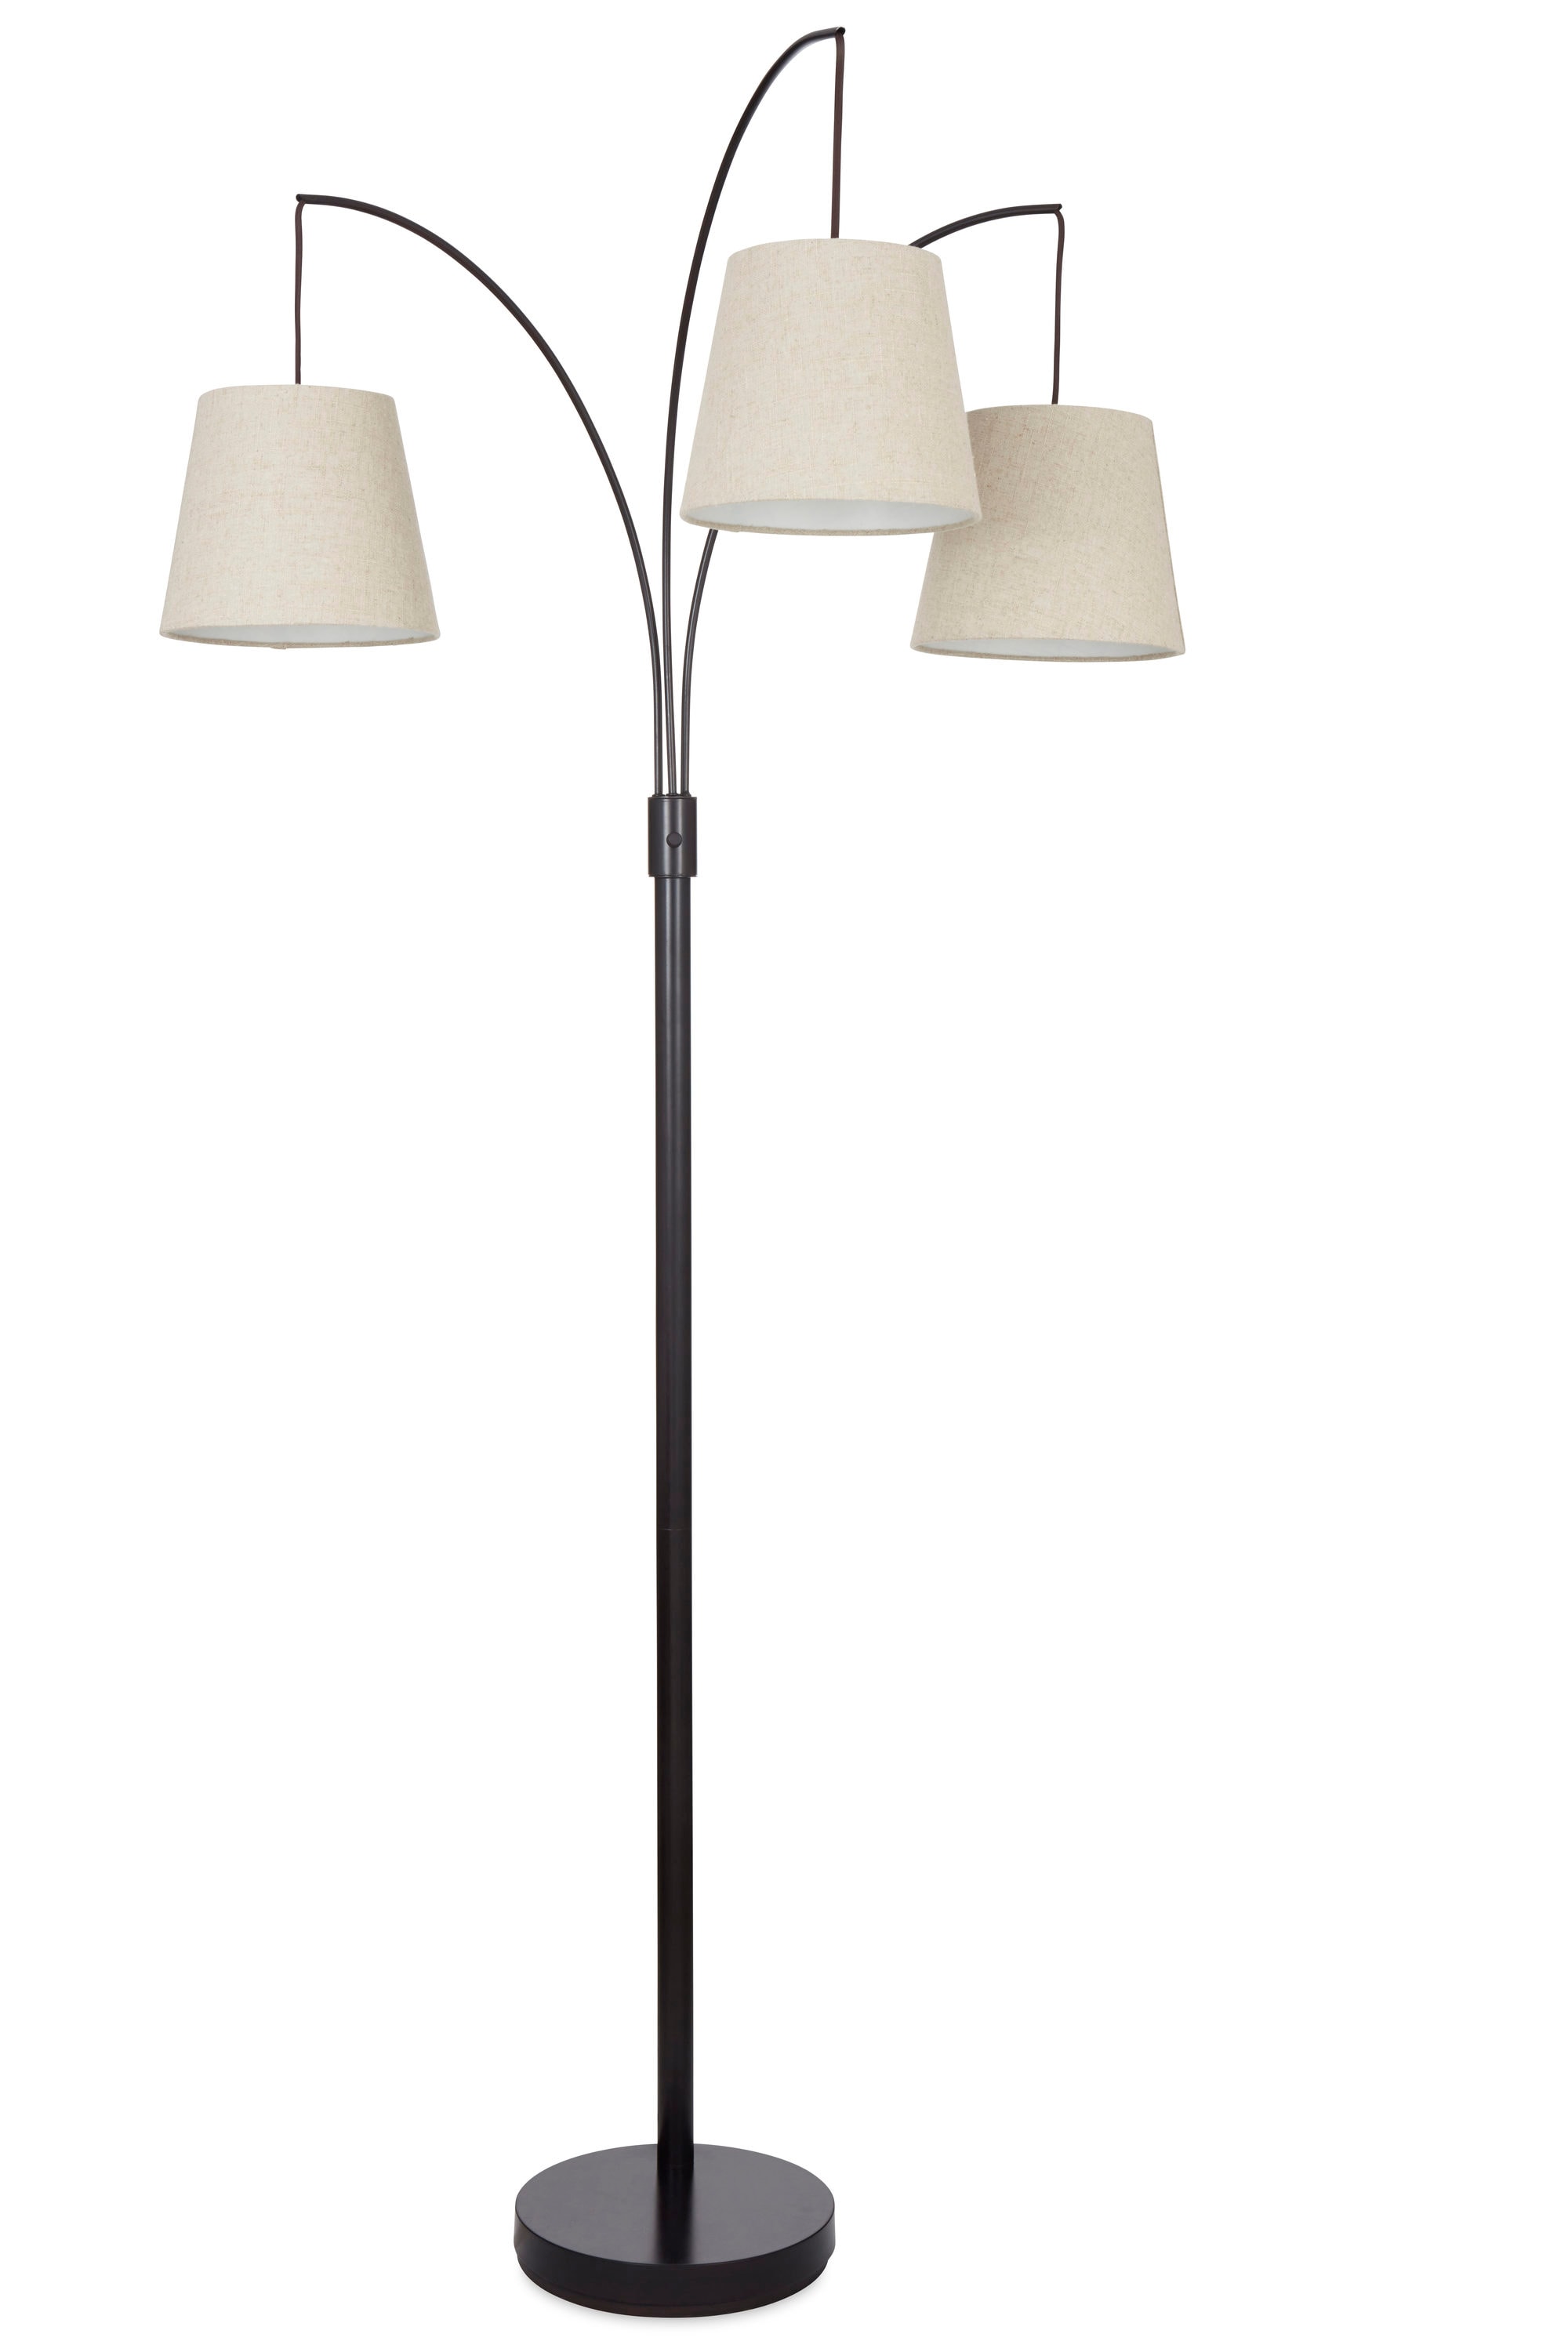 allen + roth Floor Lamps at Lowes.com